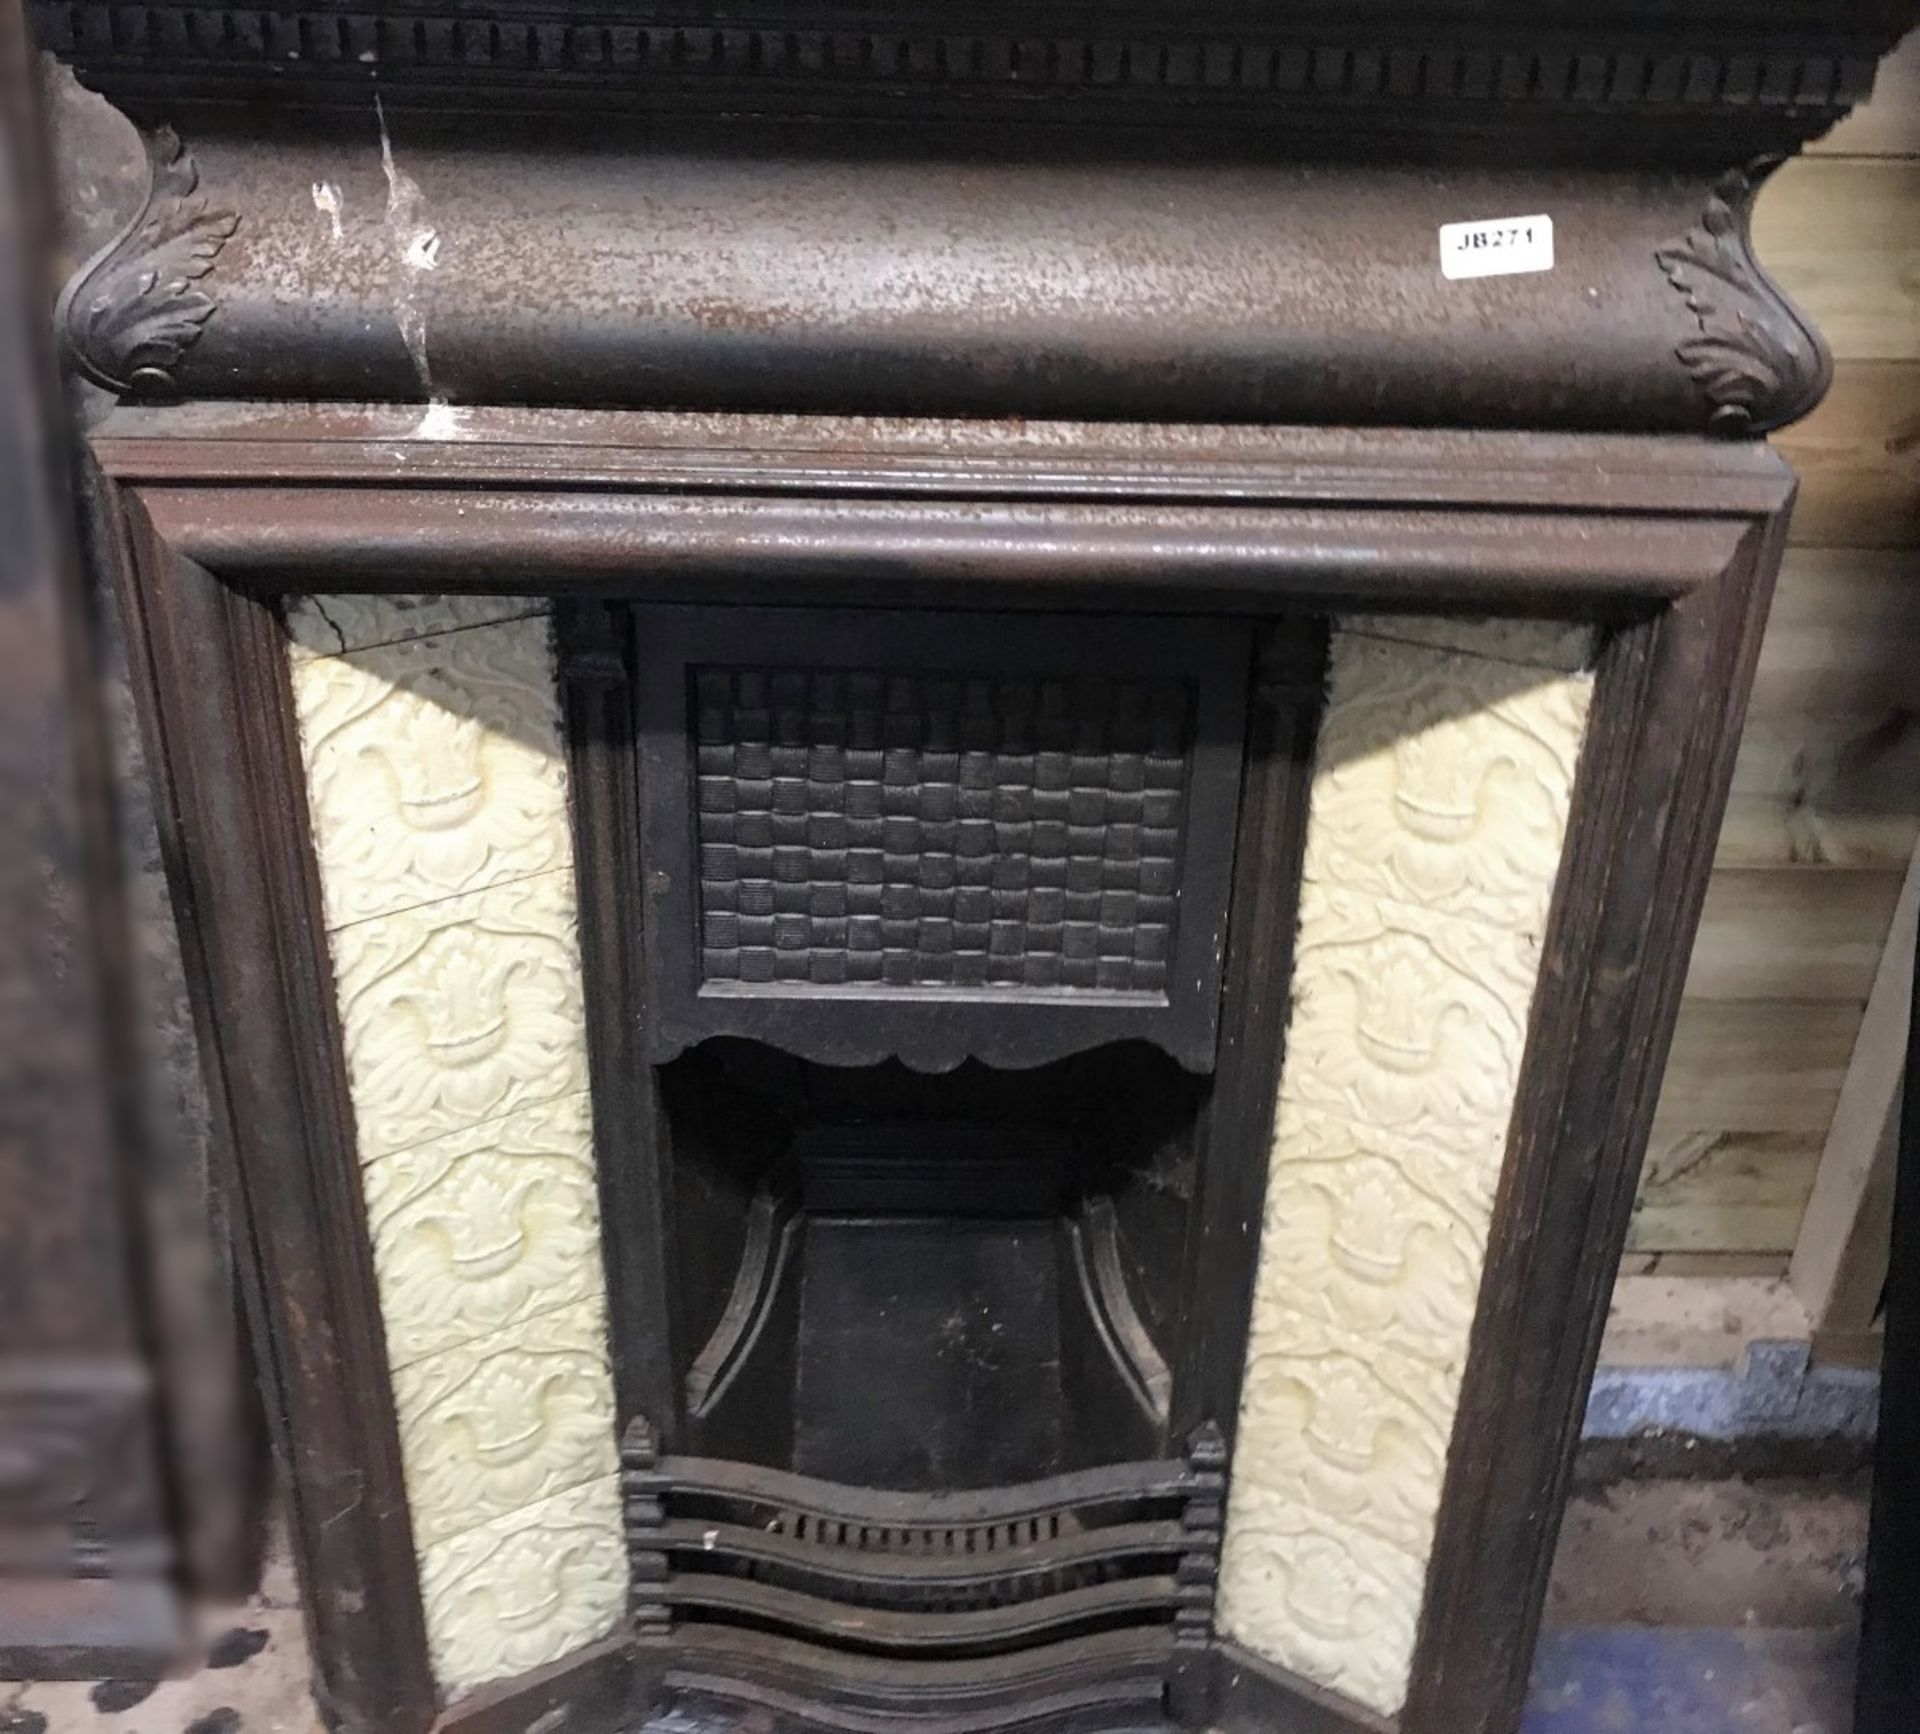 1 x Stunning Antique Victorian Cast Iron Fire Surround With Ornate Insert And Tiled Sides - Image 2 of 8